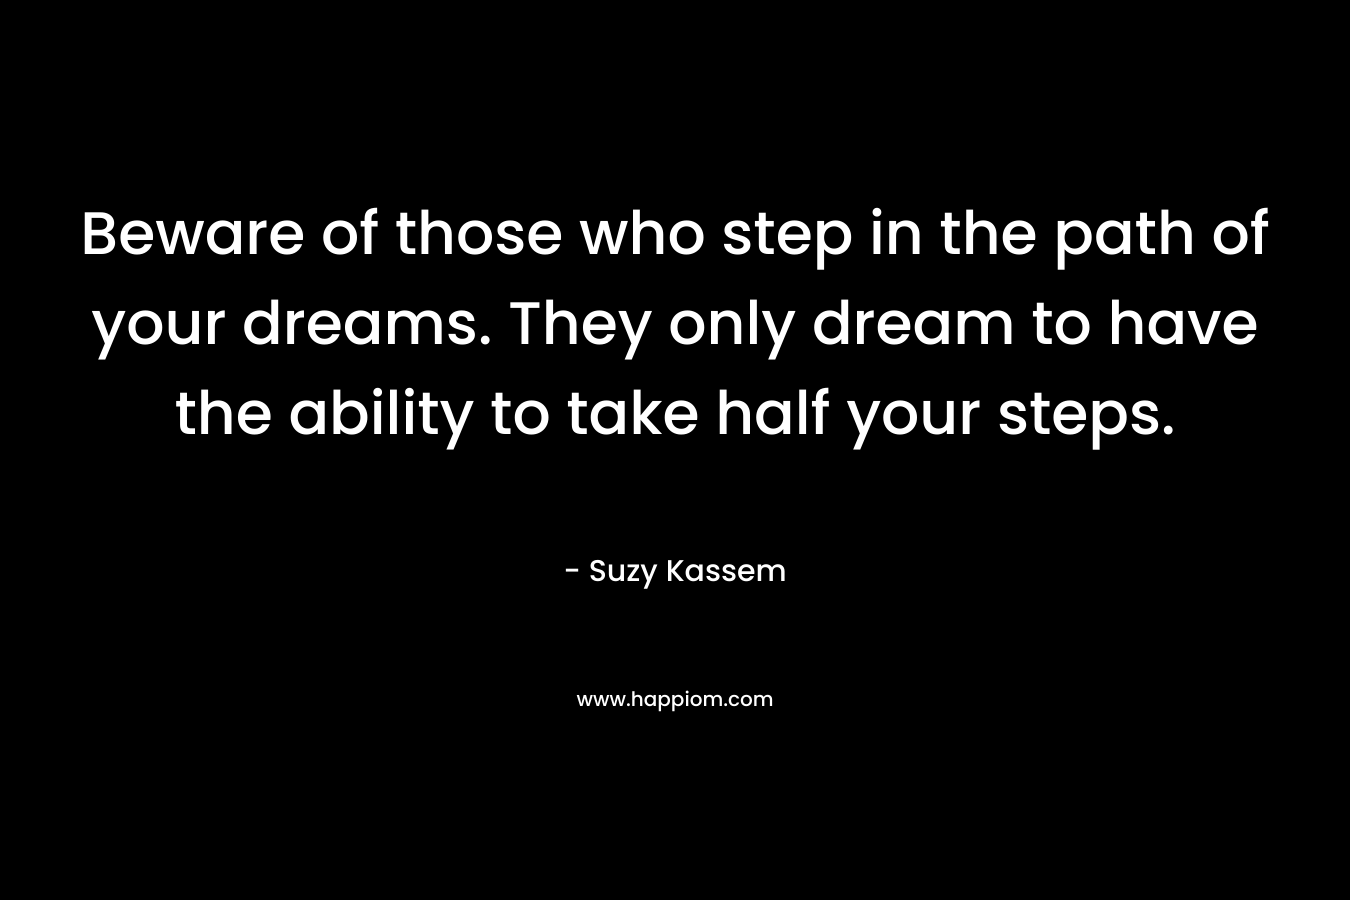 Beware of those who step in the path of your dreams. They only dream to have the ability to take half your steps.